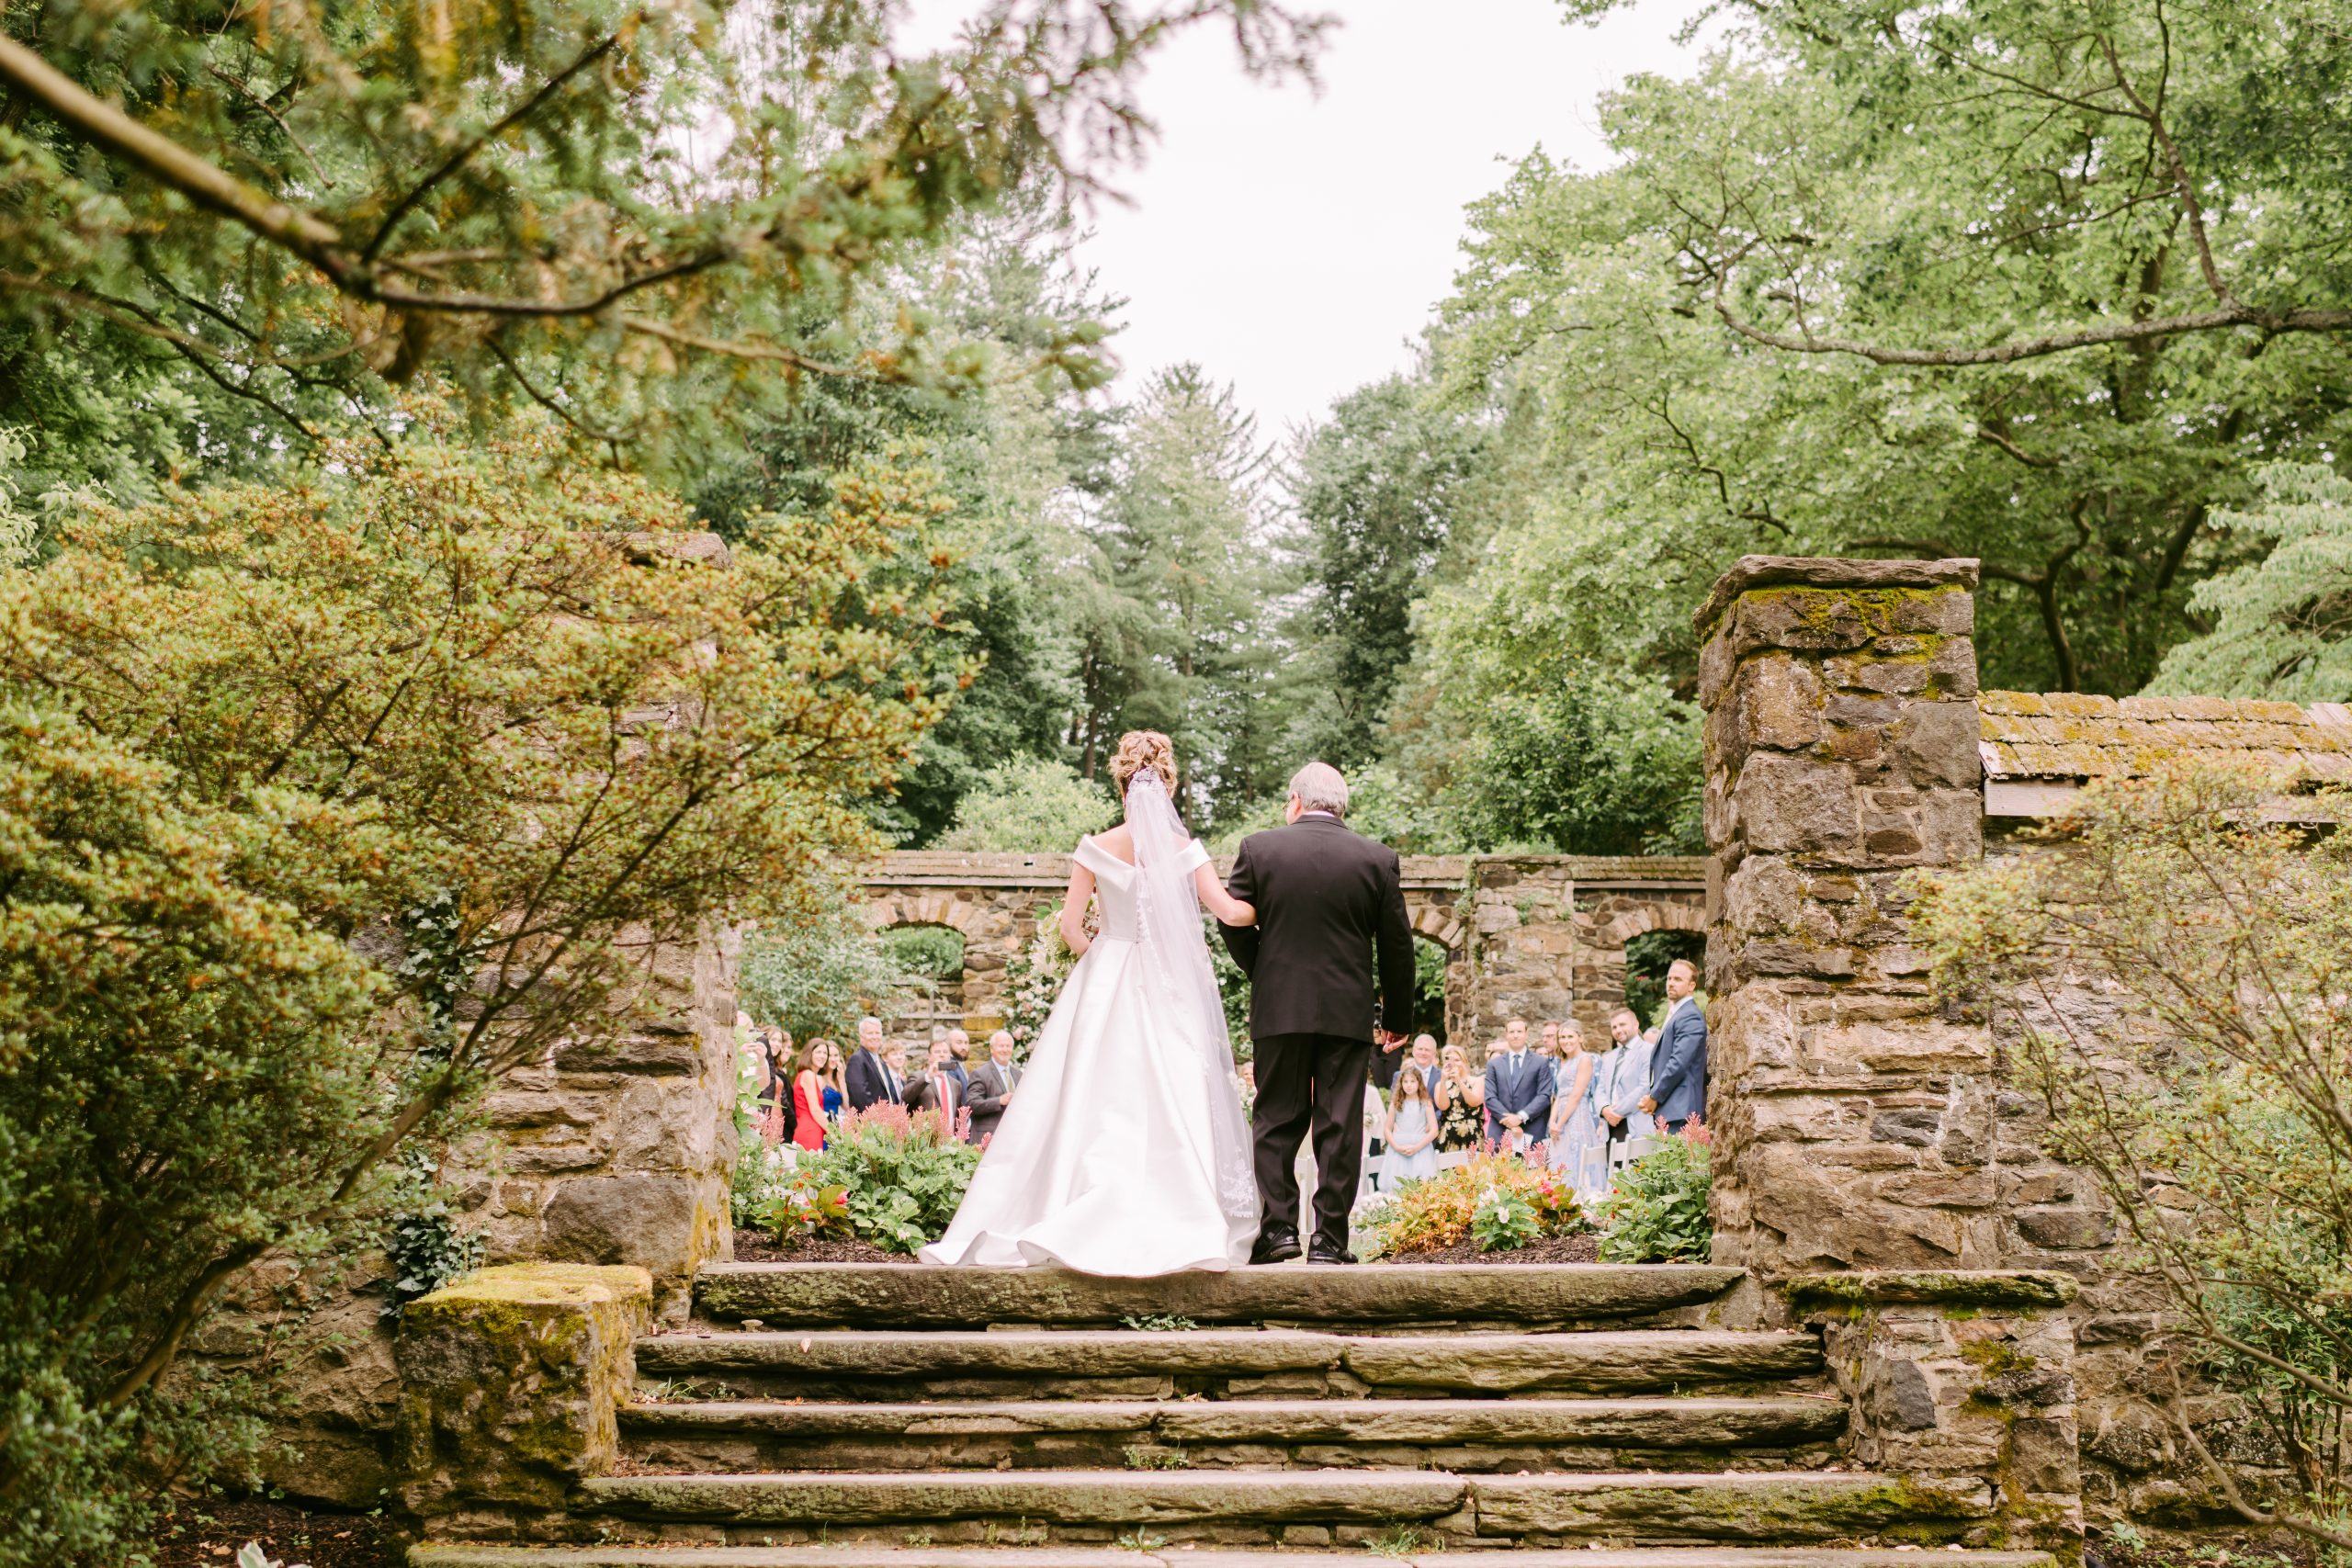 Kristen and Stephen's Whimsical Romance Wedding at Parque at Ridley Creek